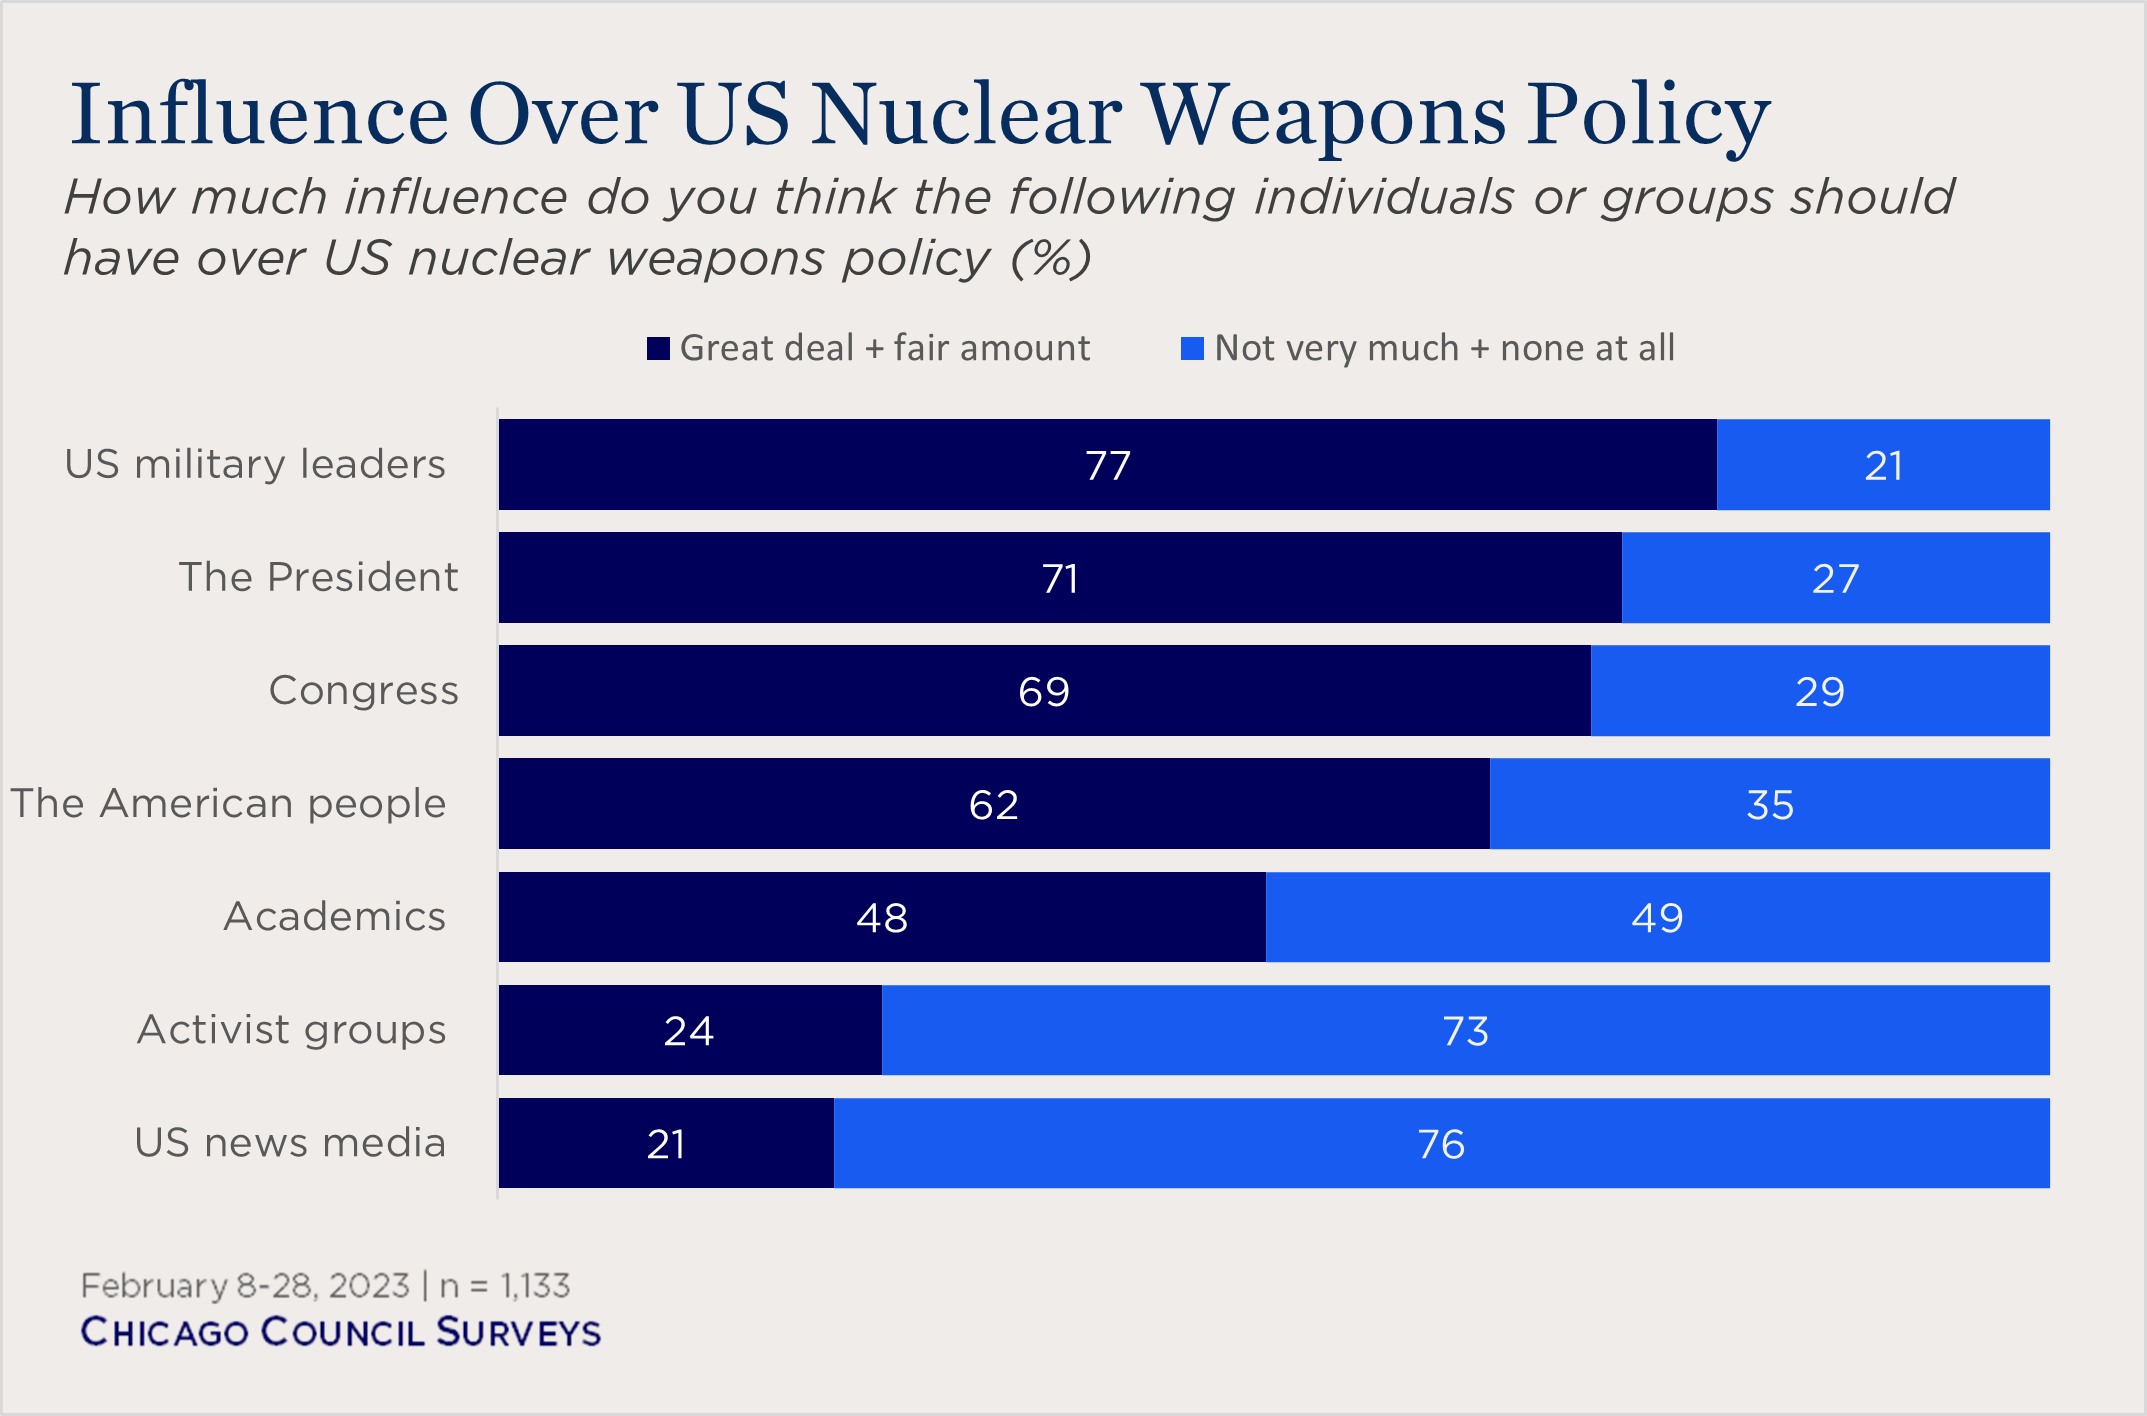 "bar chart showing views on US influence over nuclear policy"